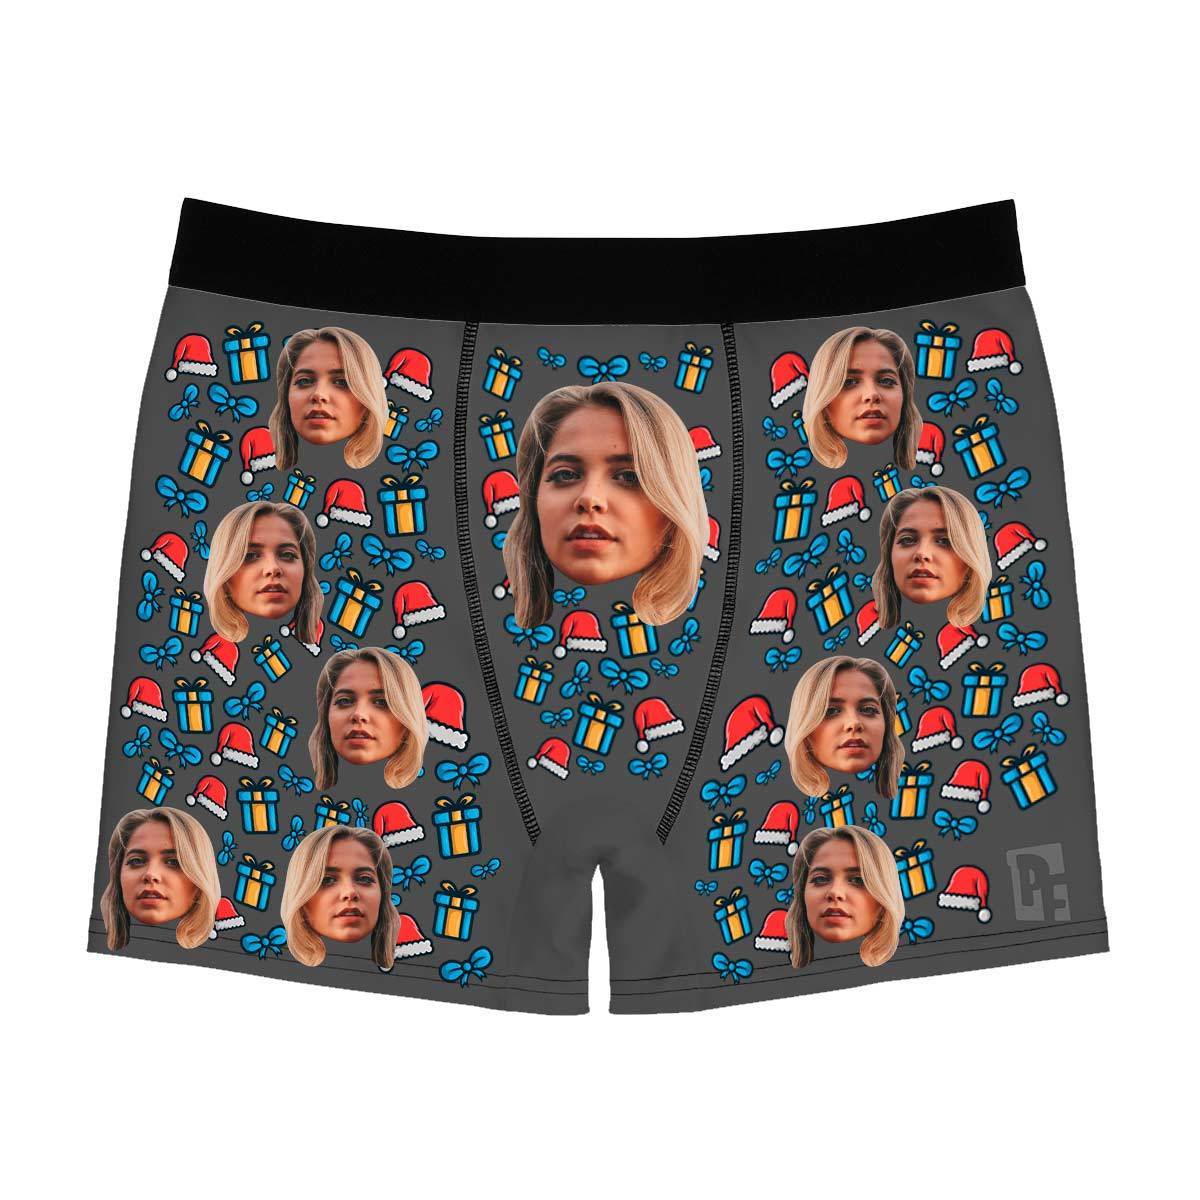 Dark Christmas Hat men's boxer briefs personalized with photo printed on them